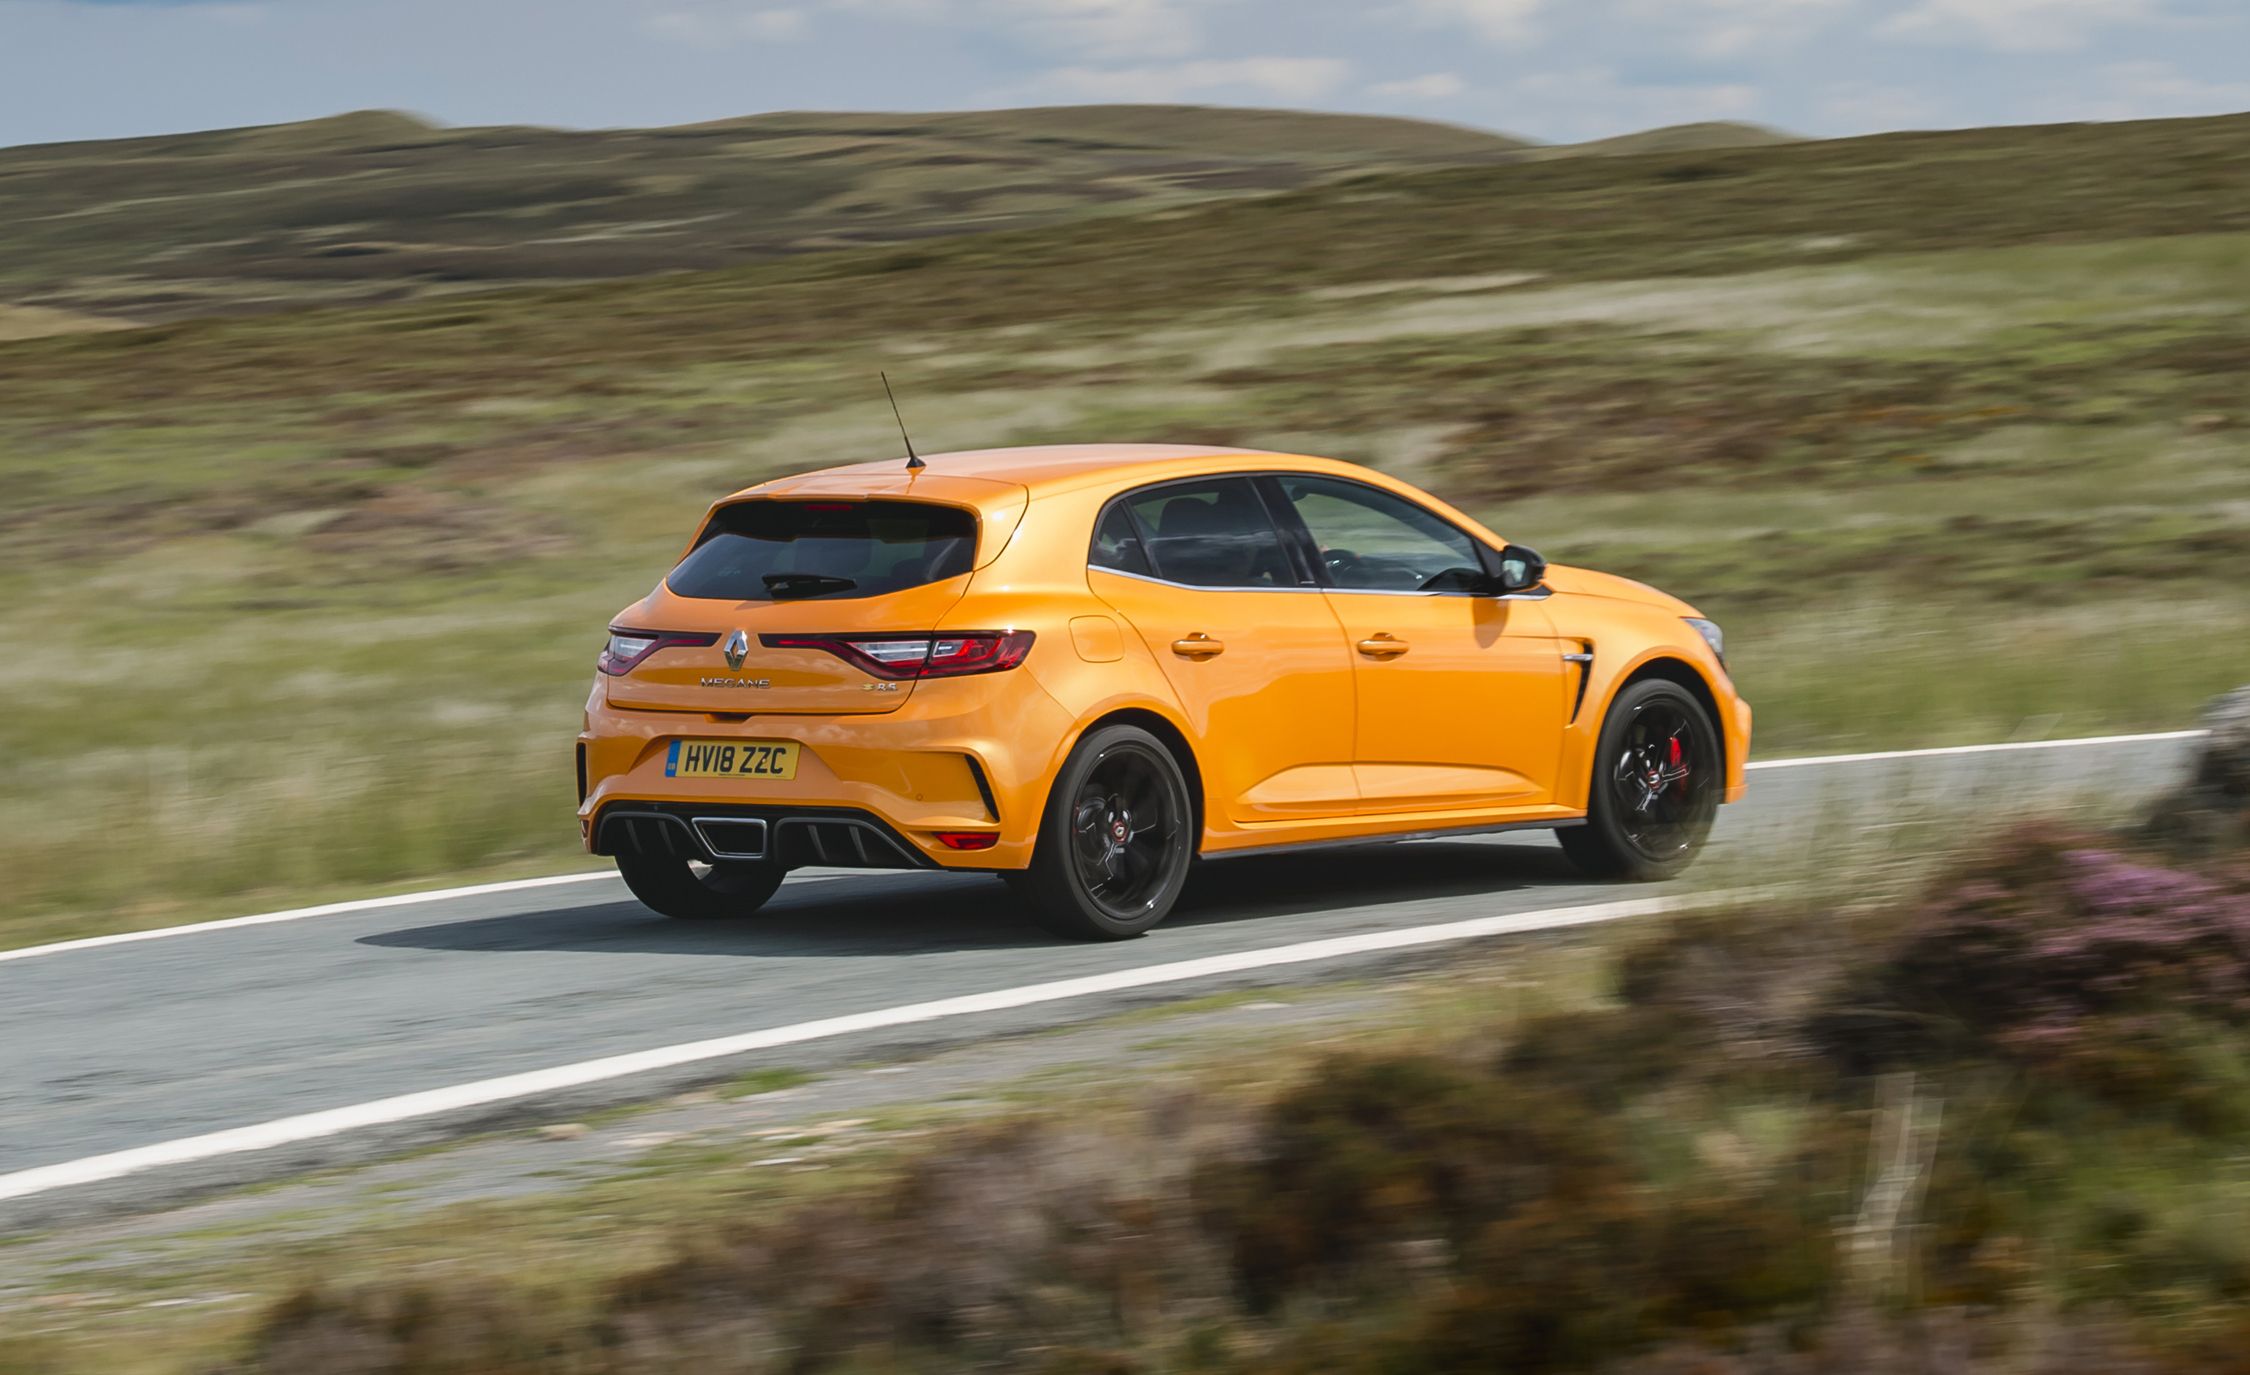 The Mégane R.S. 280 - A French Hot Hatch